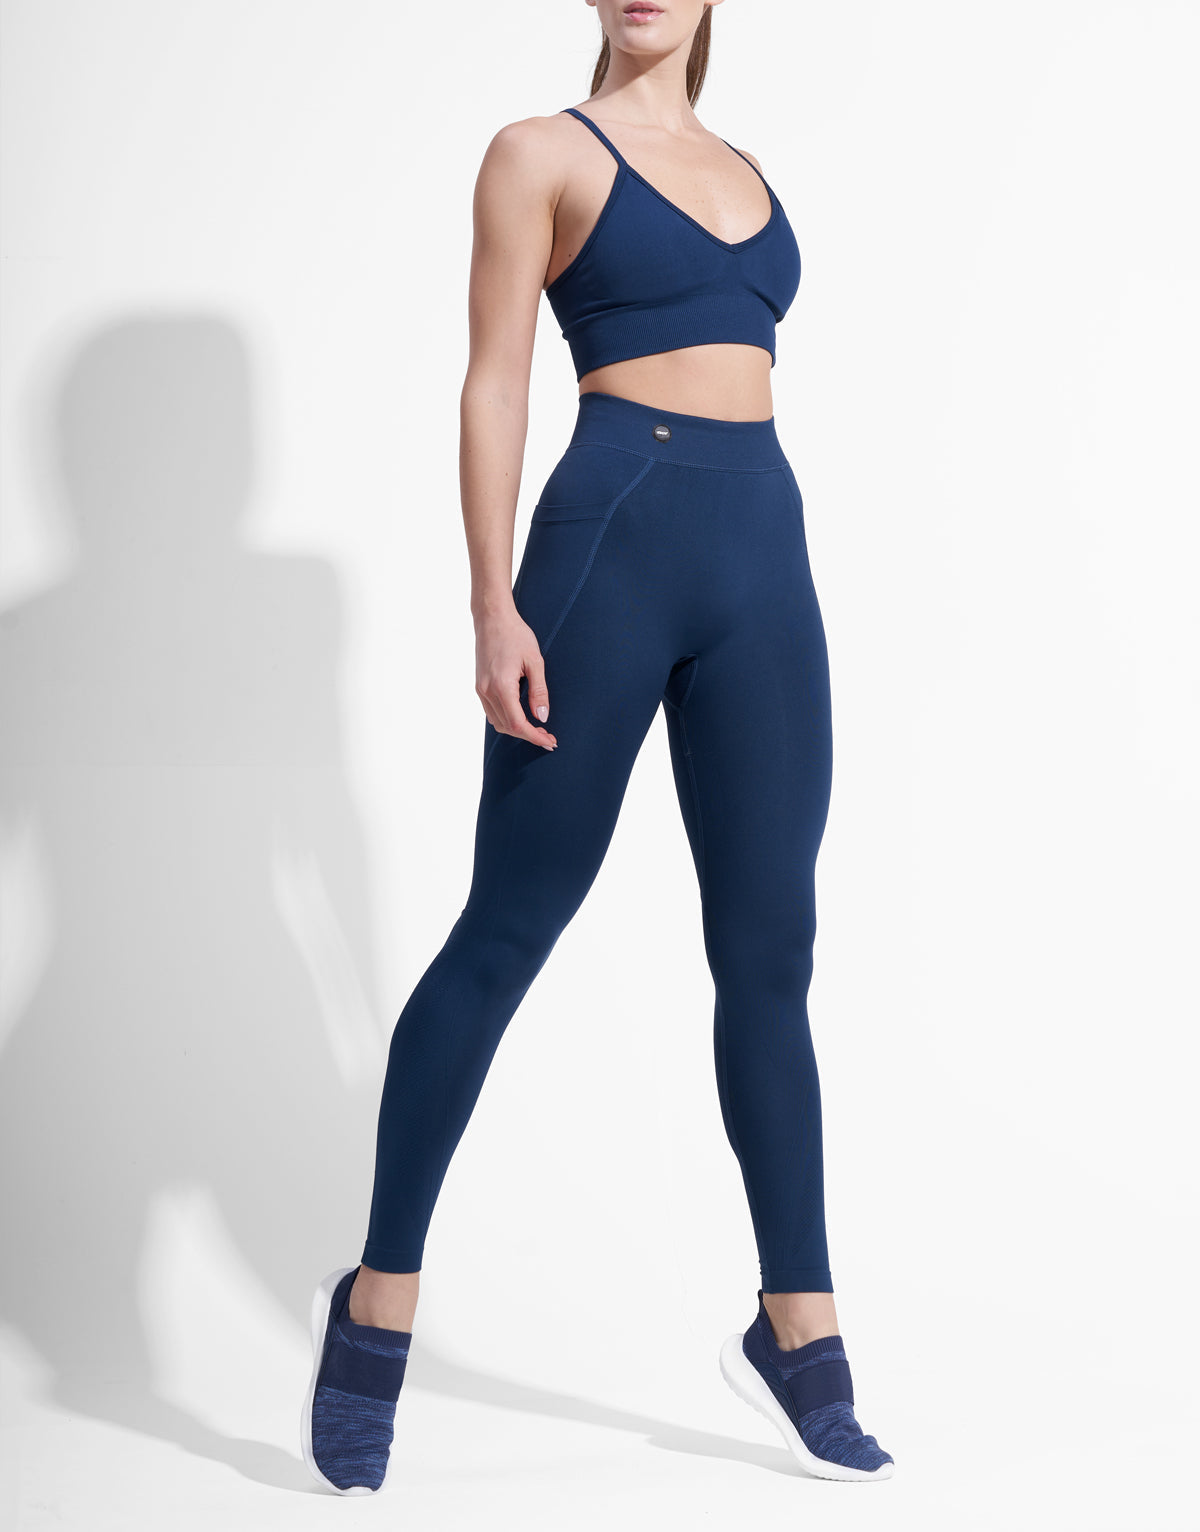 POUCH BLUE SEAMLESS TOP